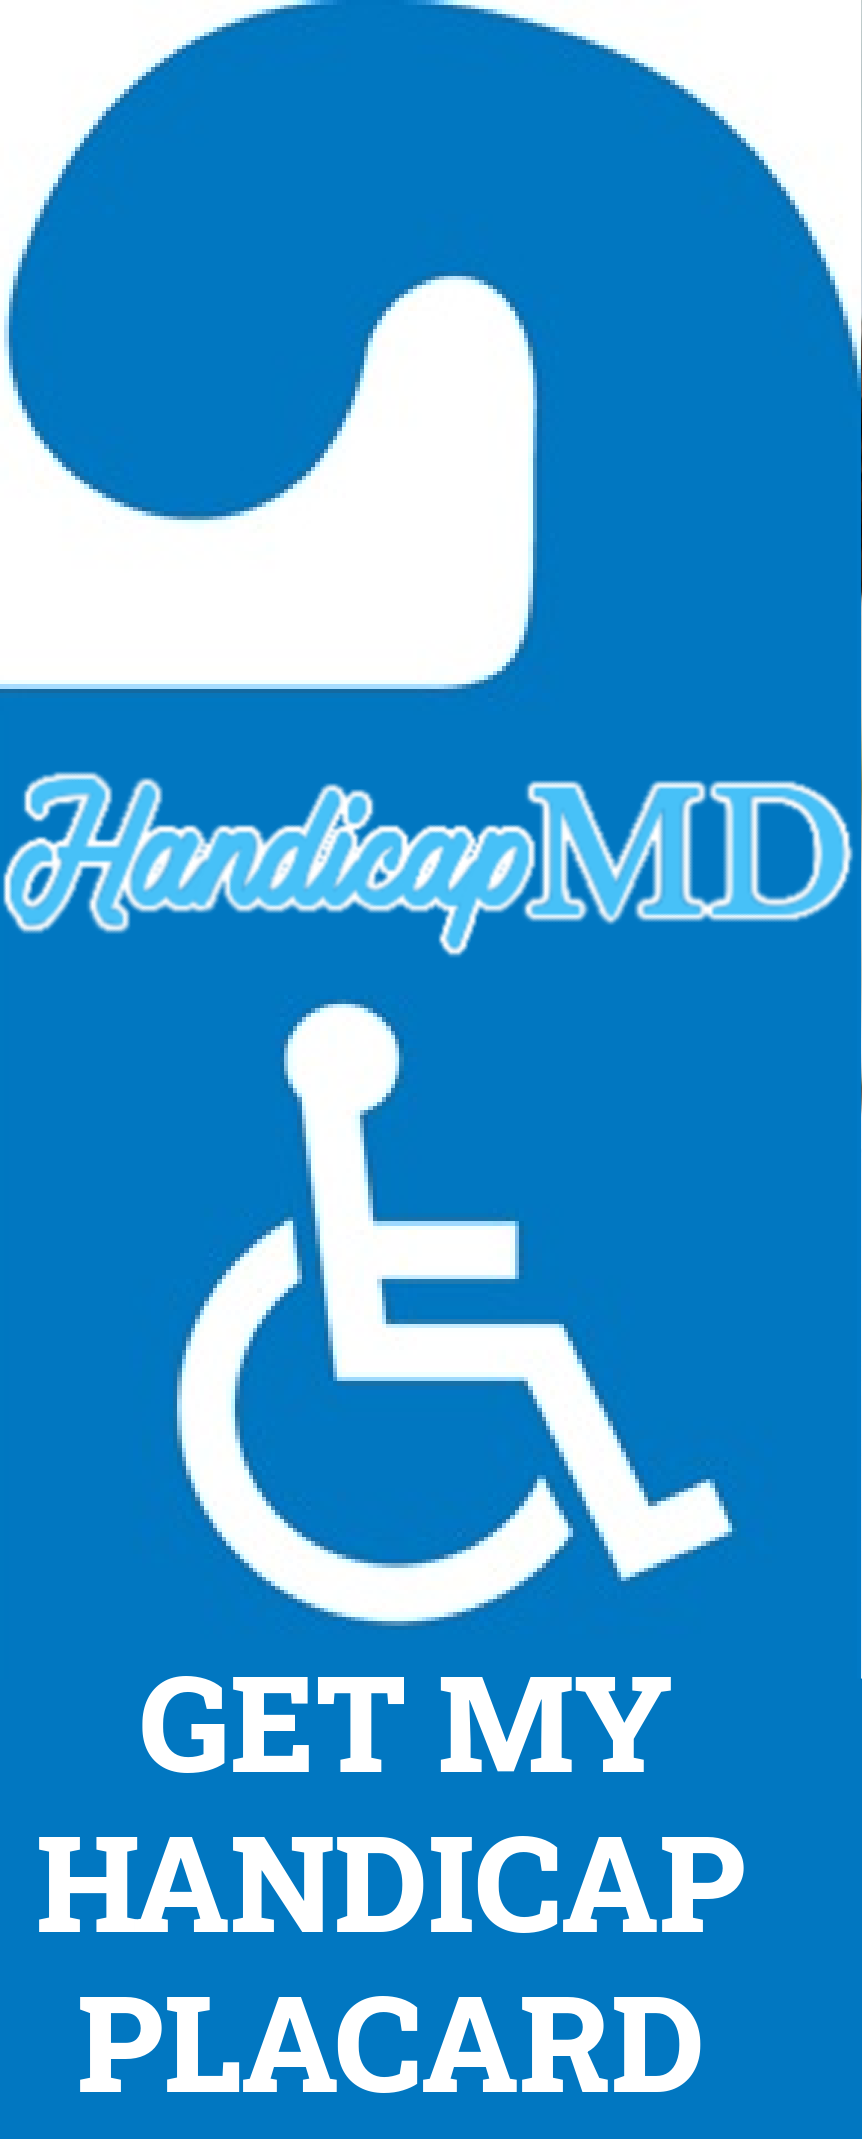 How To Get A Handicap Parking Placard Renewal in Kentucky